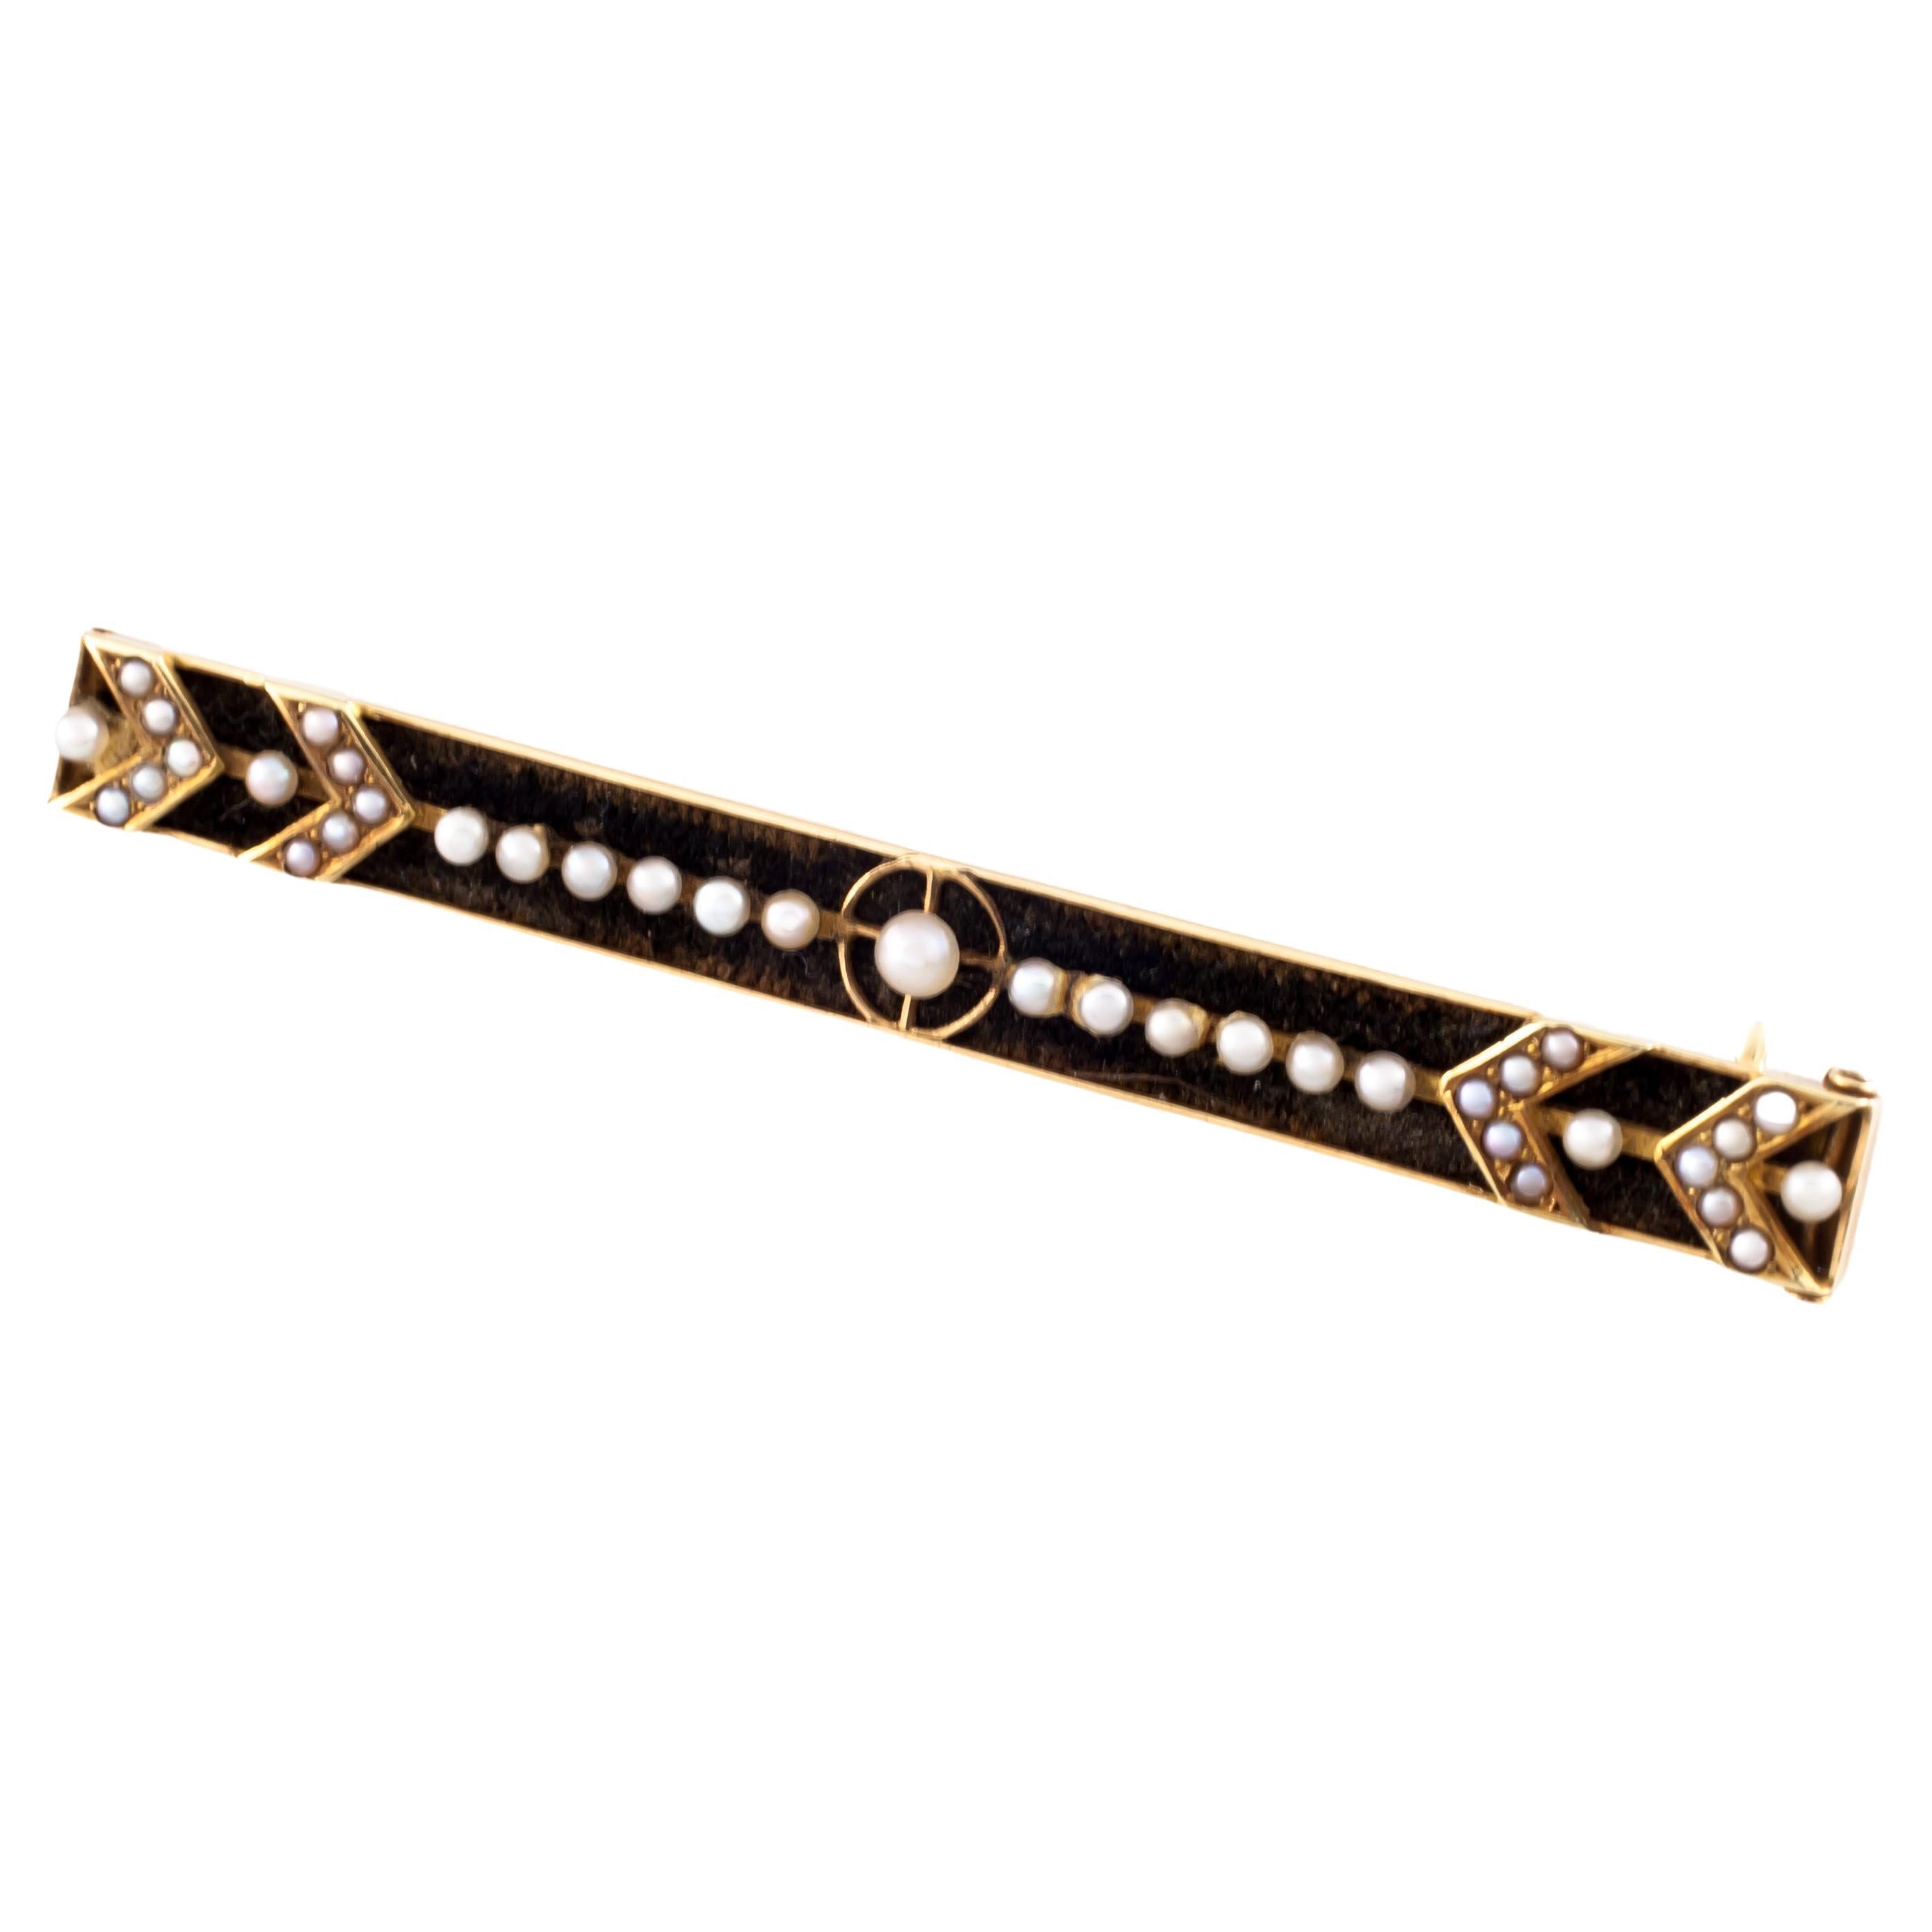 Vintage 14k Yellow Gold Brooch/Tie Bar with Seed Pearls For Sale